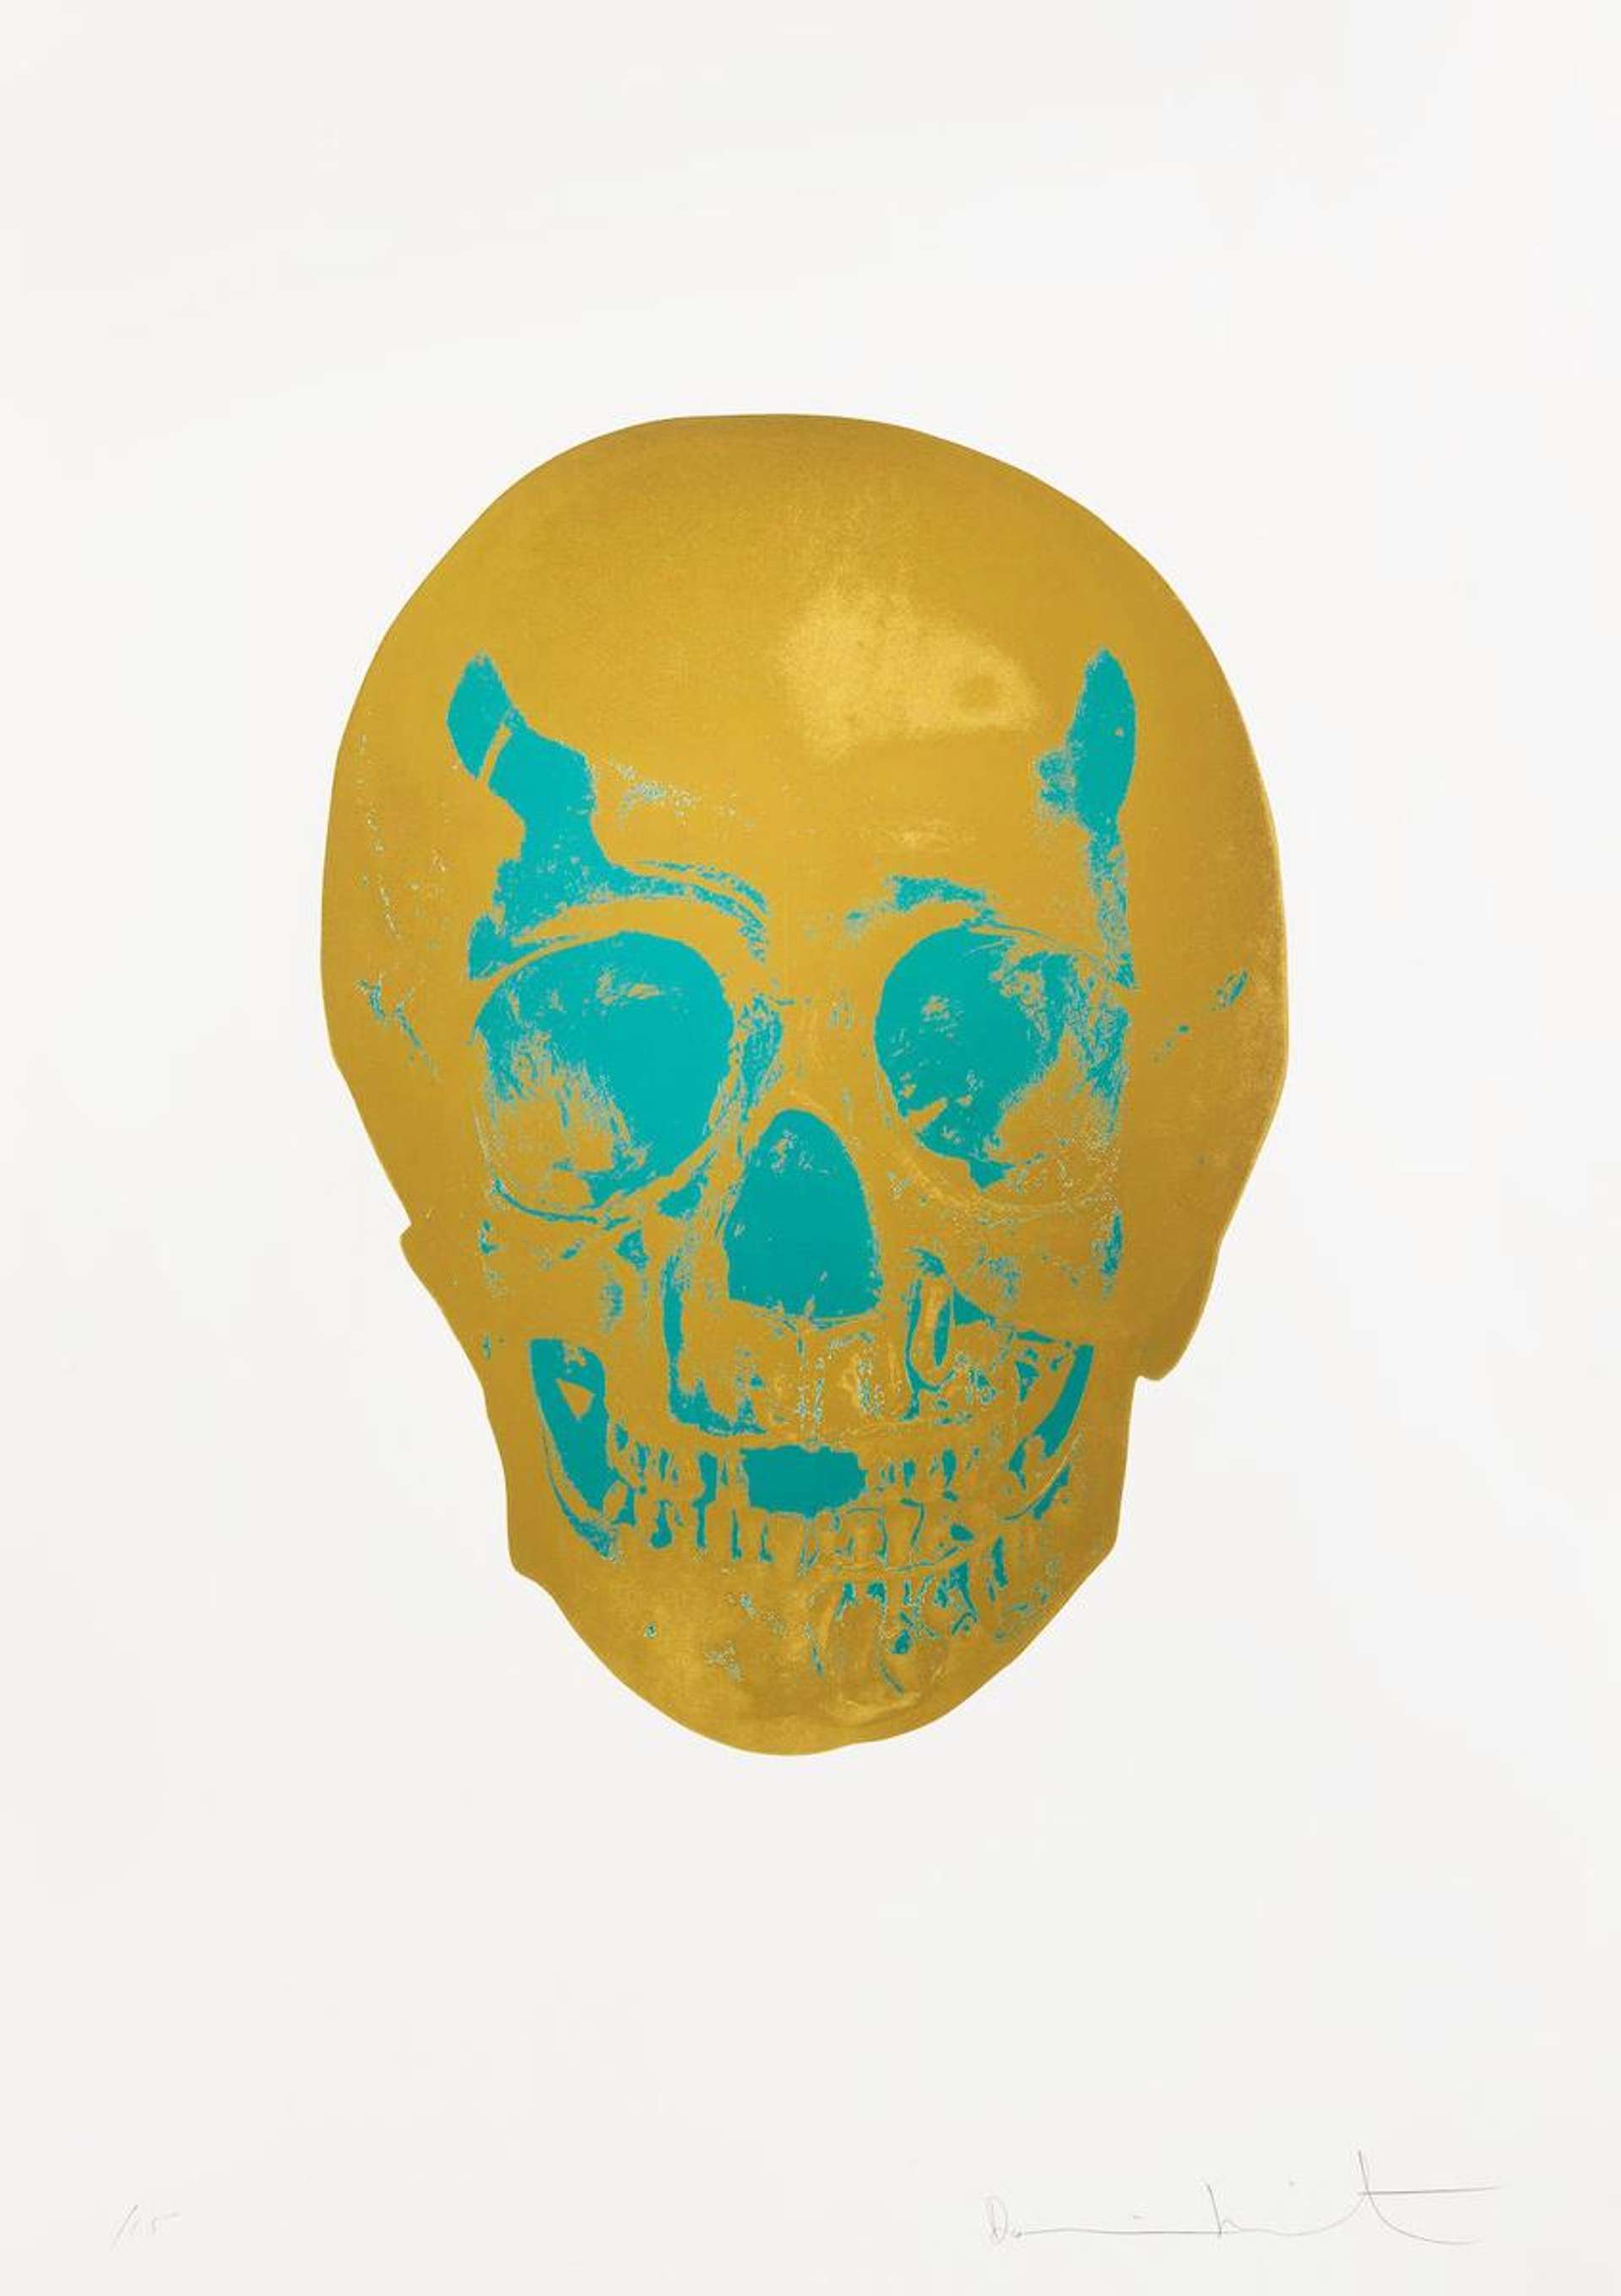 The Dead (oriental gold, turquoise) - Signed Print by Damien Hirst 2009 - MyArtBroker